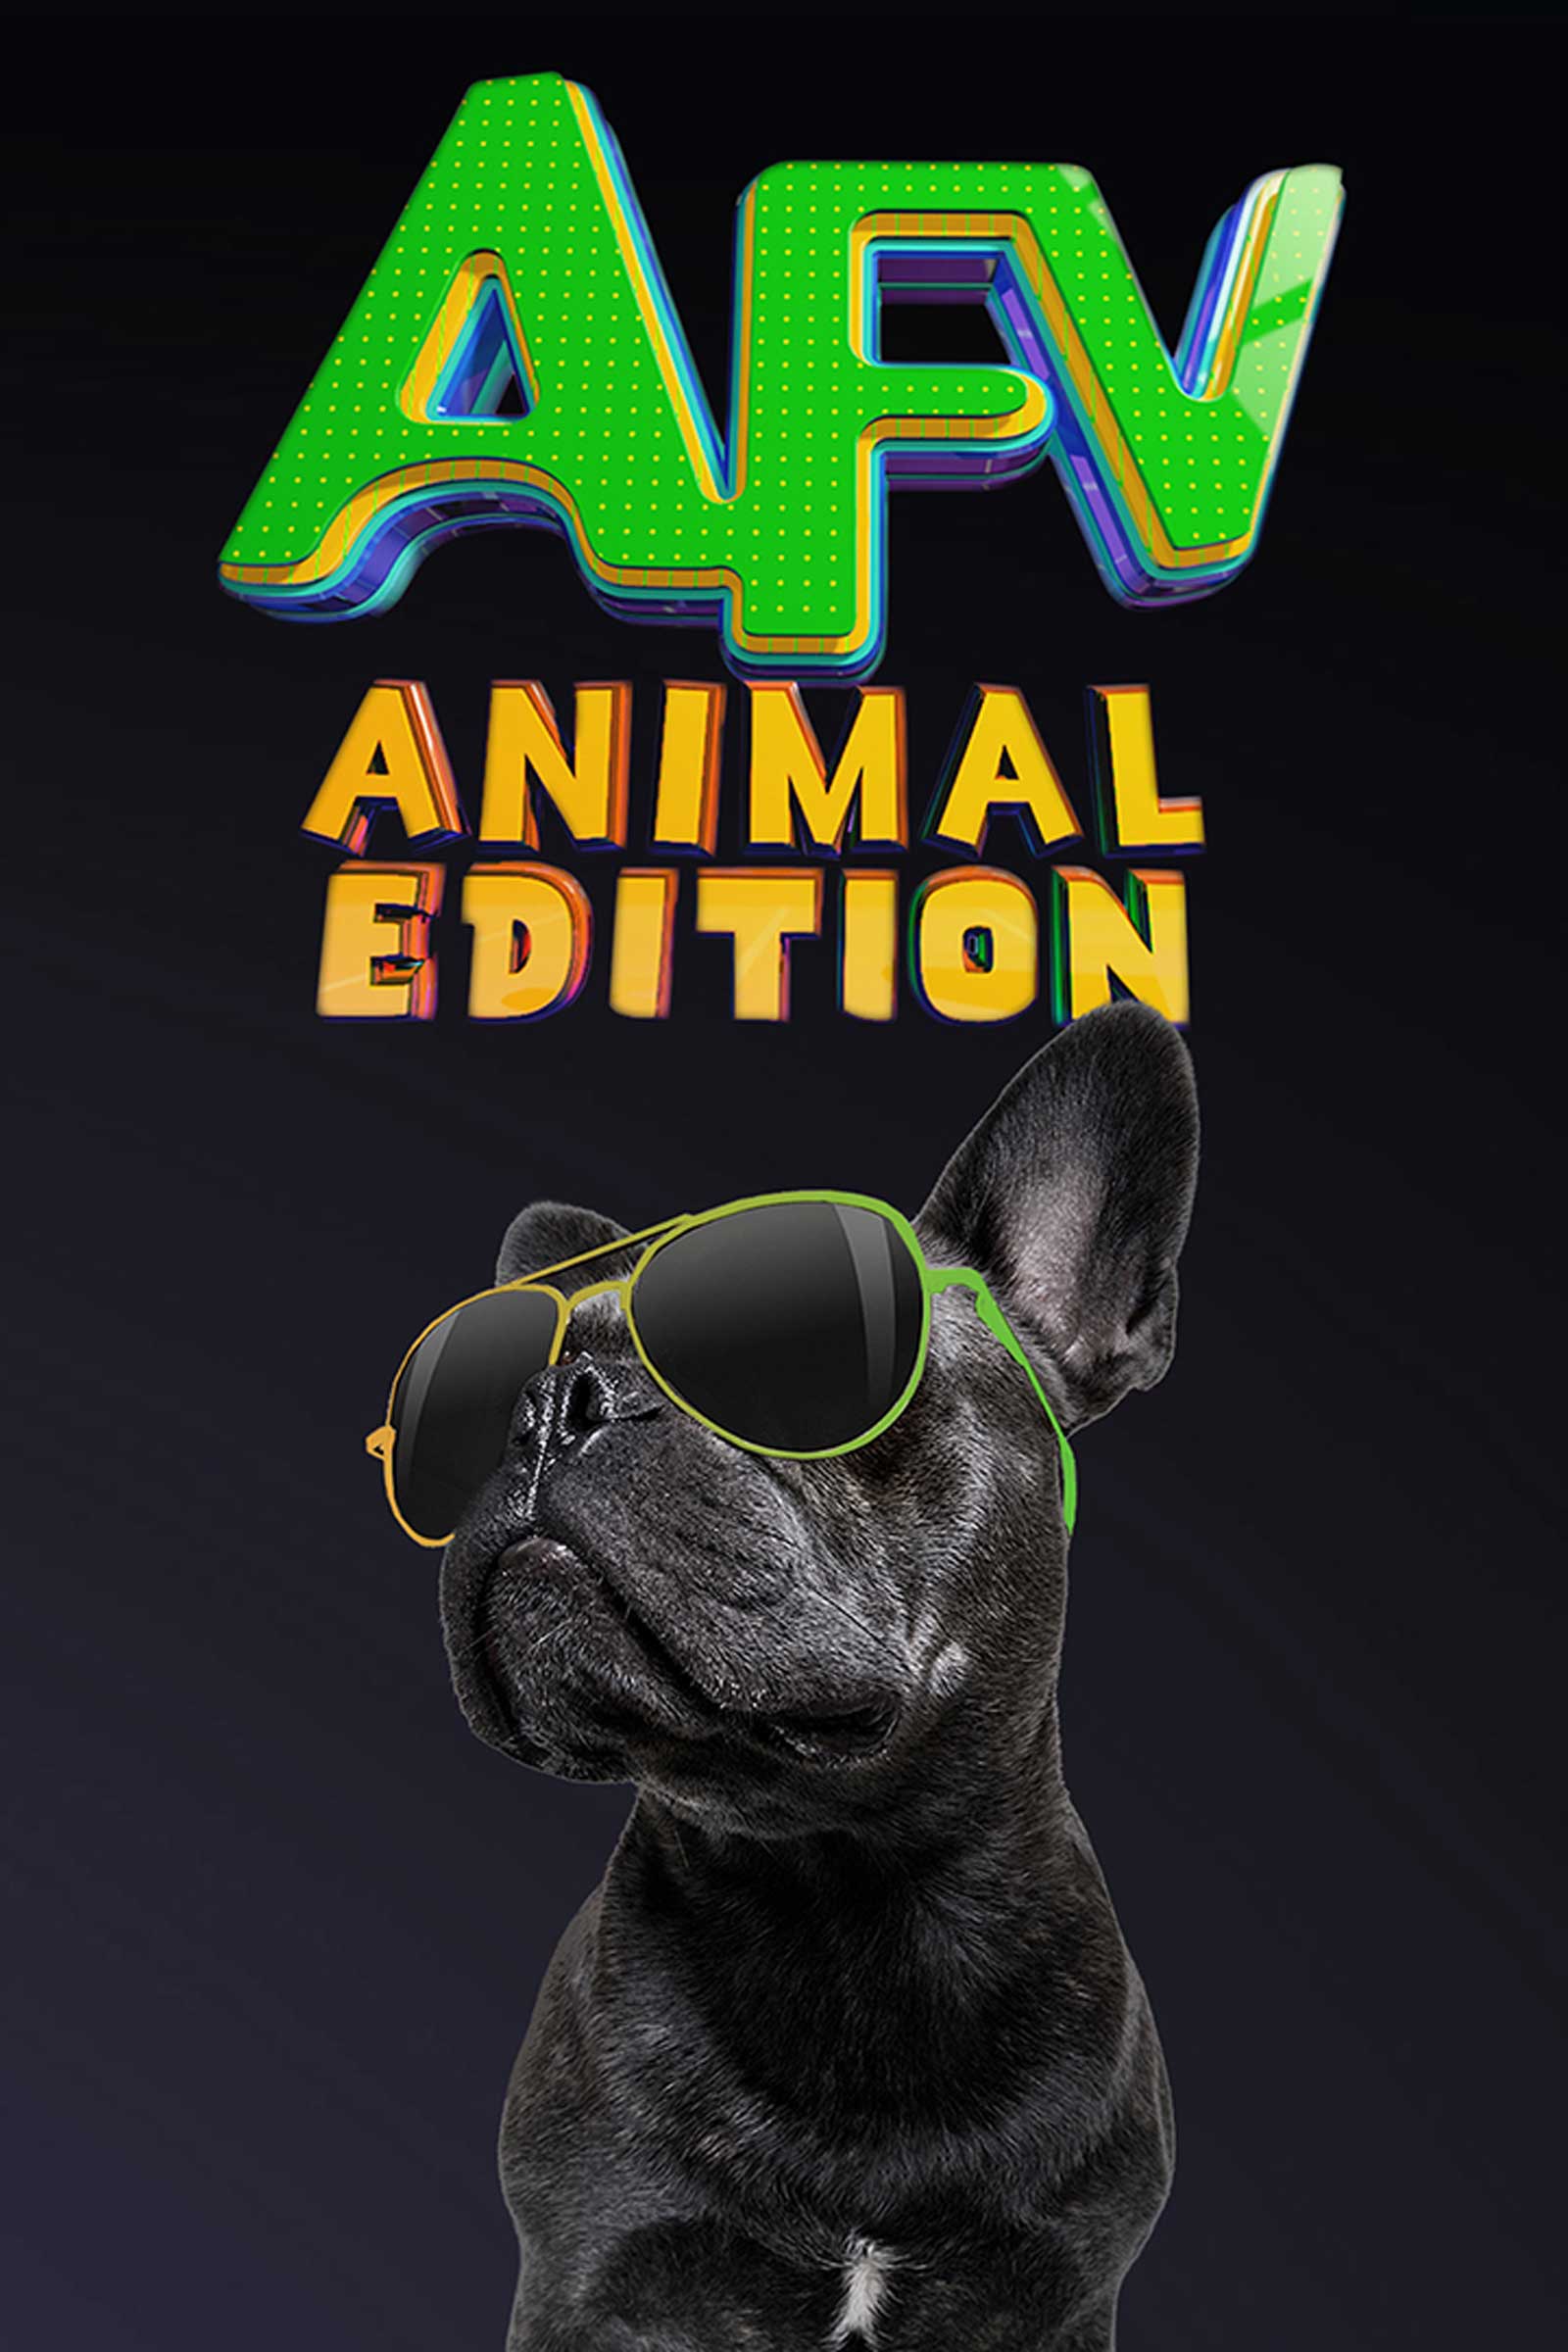 Animals edition. America's funniest Home Videos.